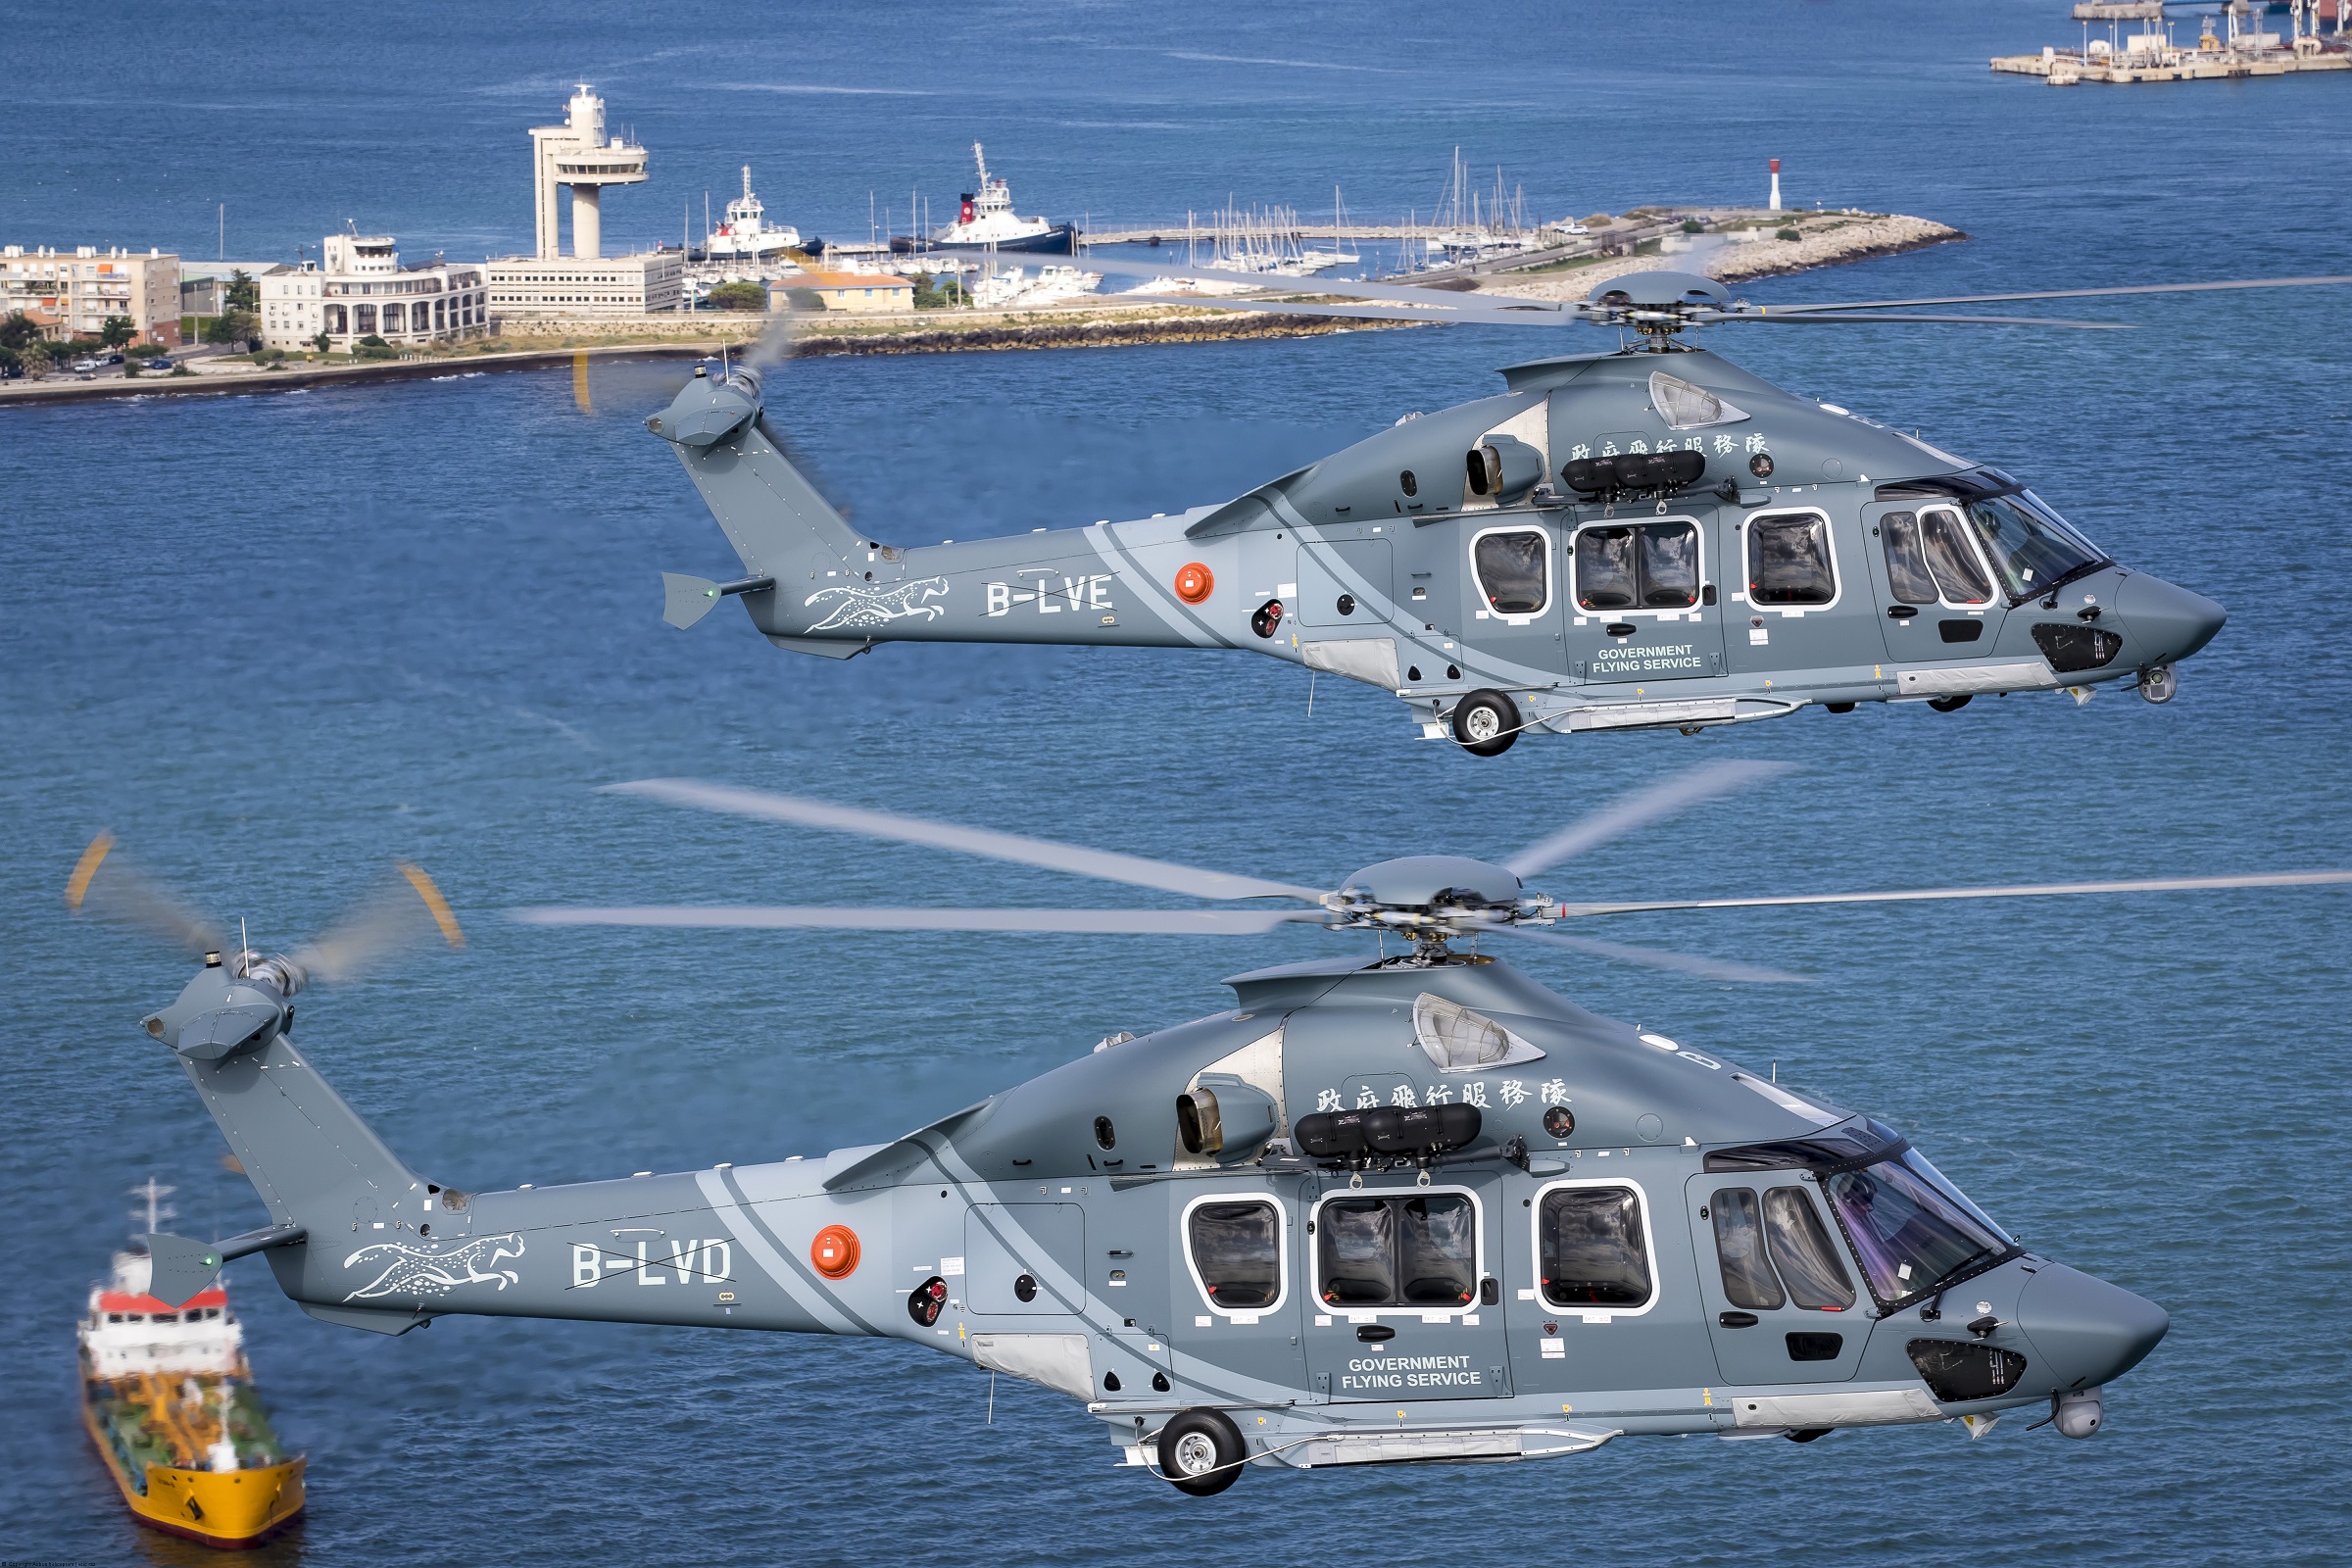 Hong Kong’s Government Flying Service Receive First H175s in Public Services Configuration ©Eric Raz